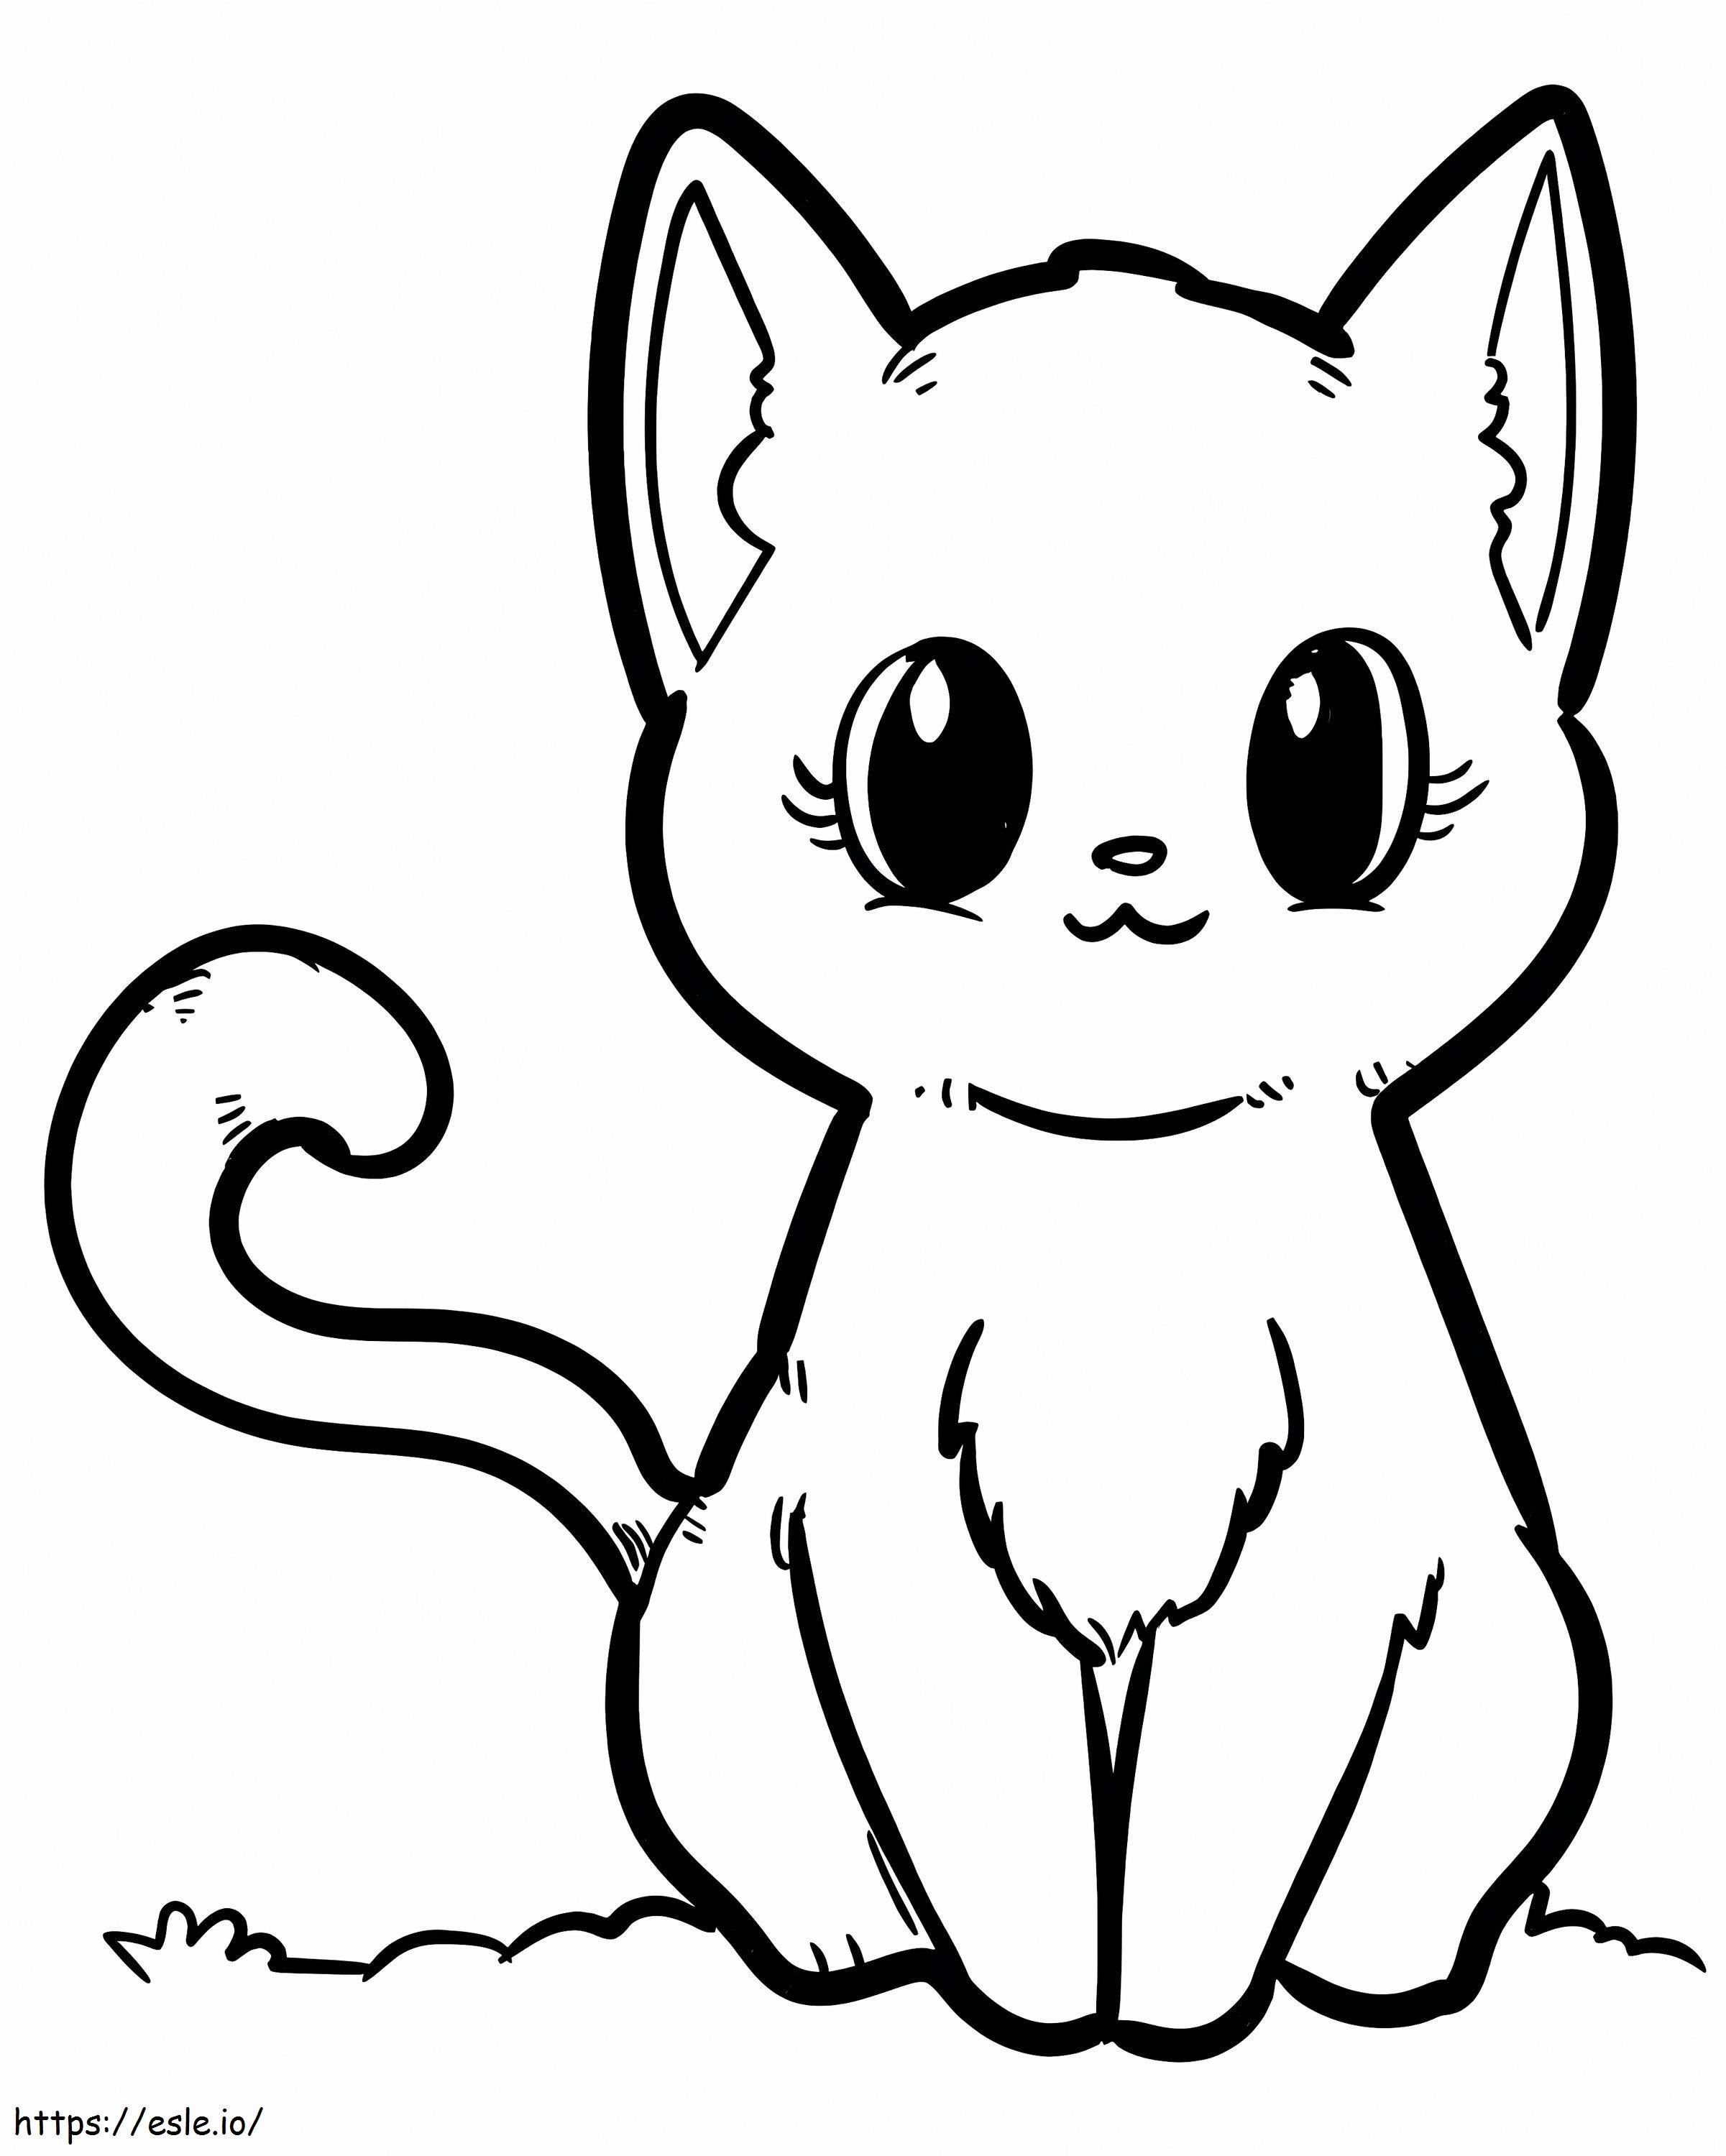 Cute Kitten coloring page